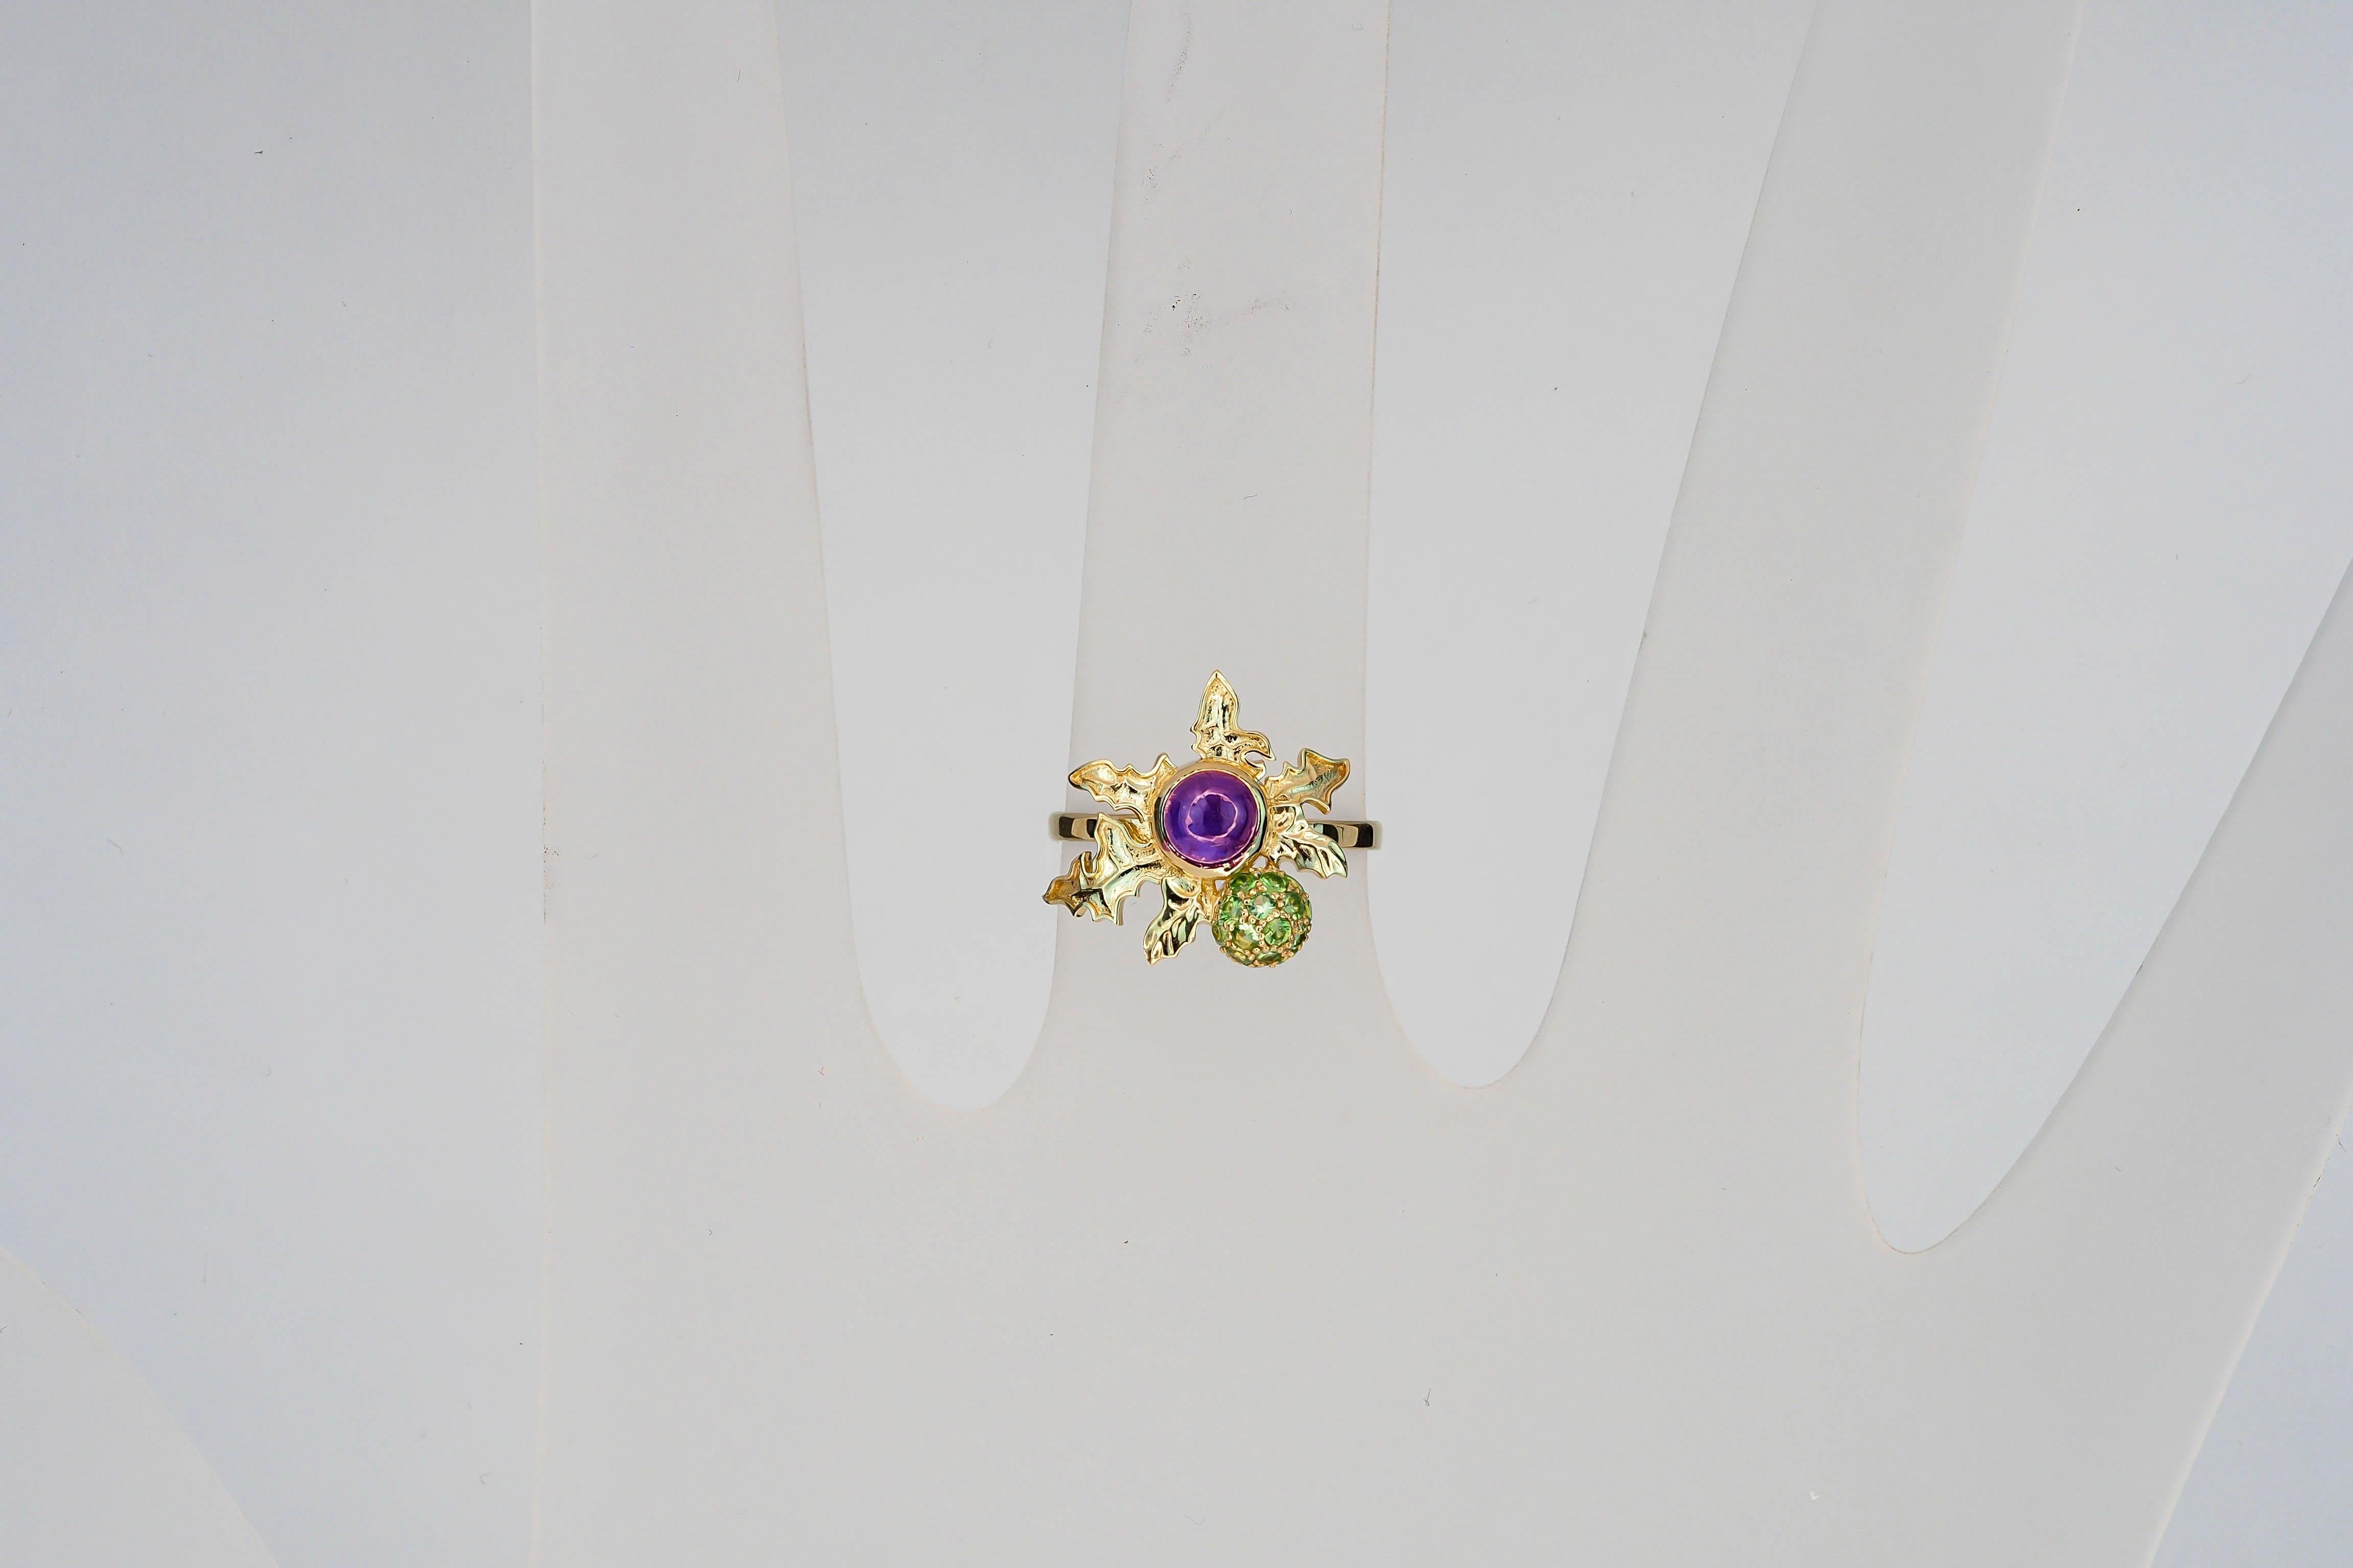 14 K Gold Scottish Thistle Ring with Amethyst and Peridots 4